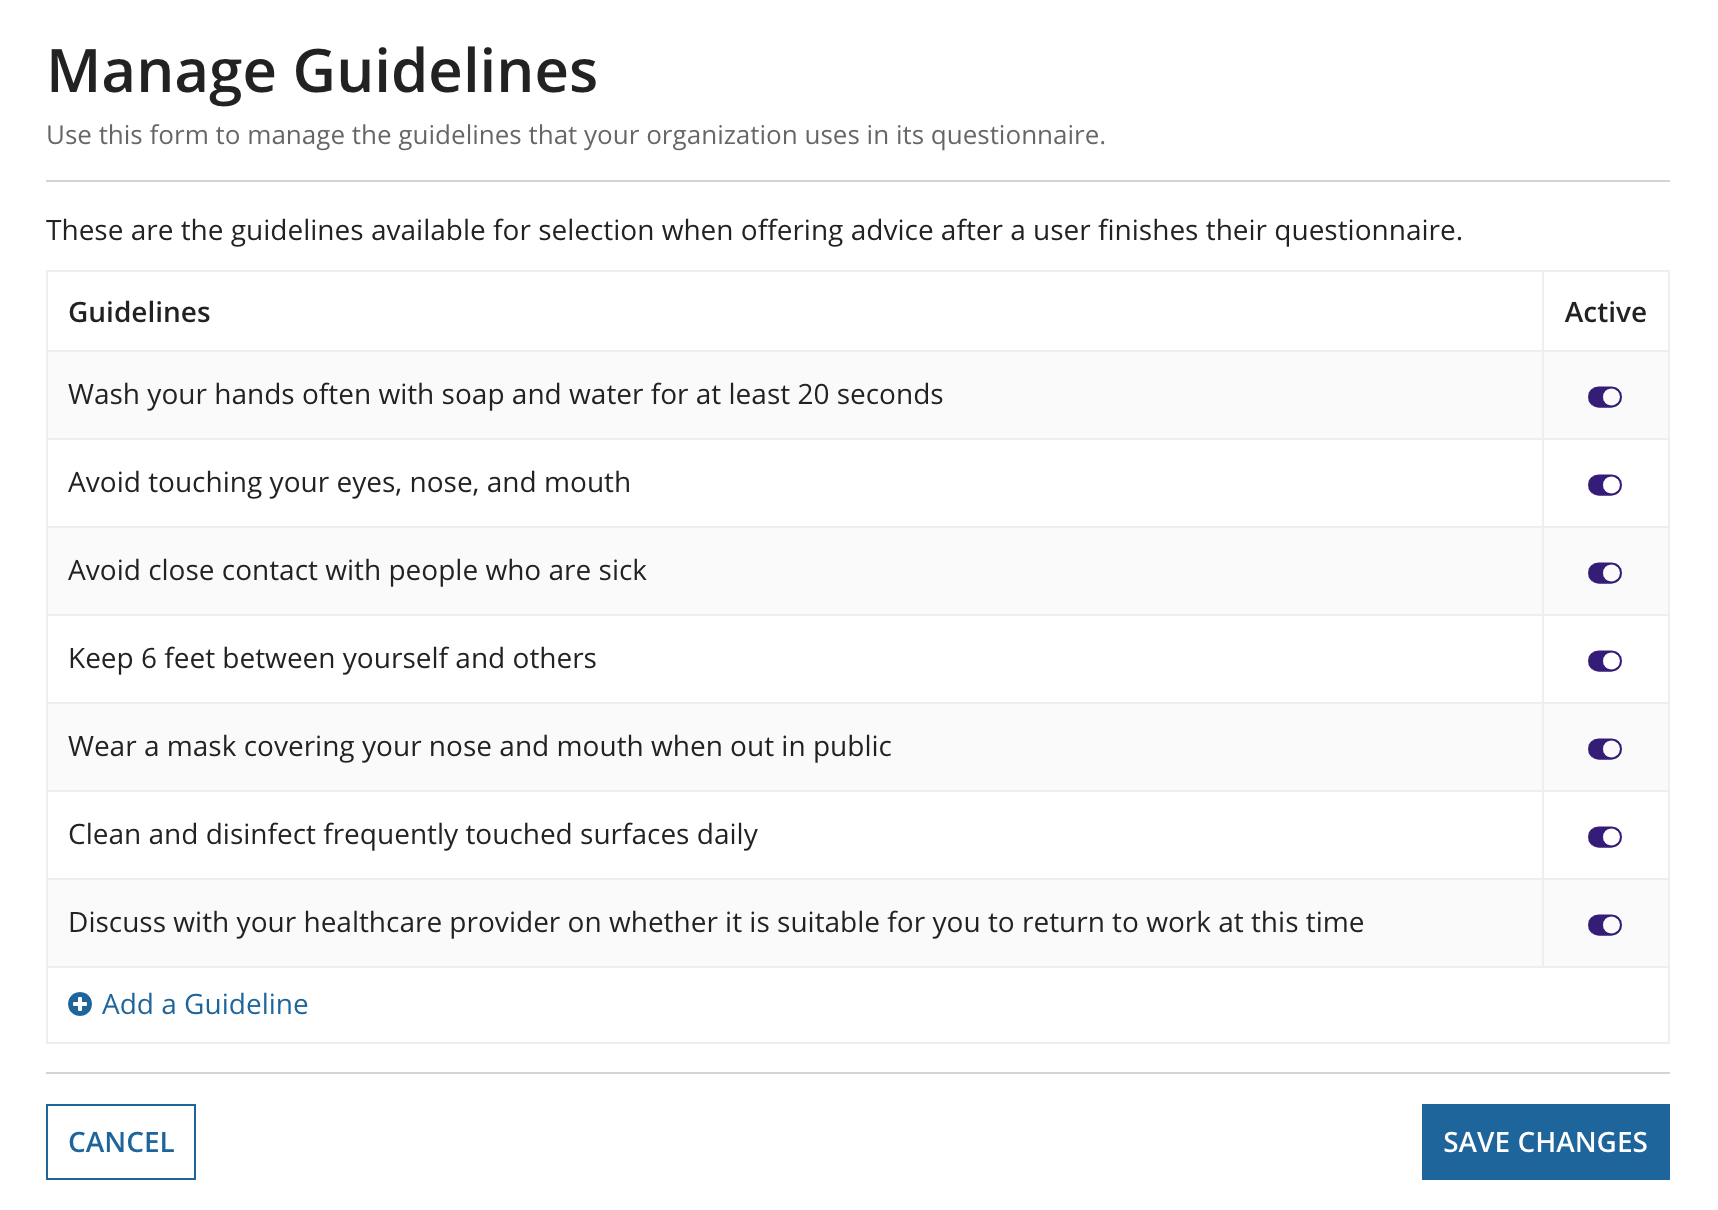 Manage guidelines